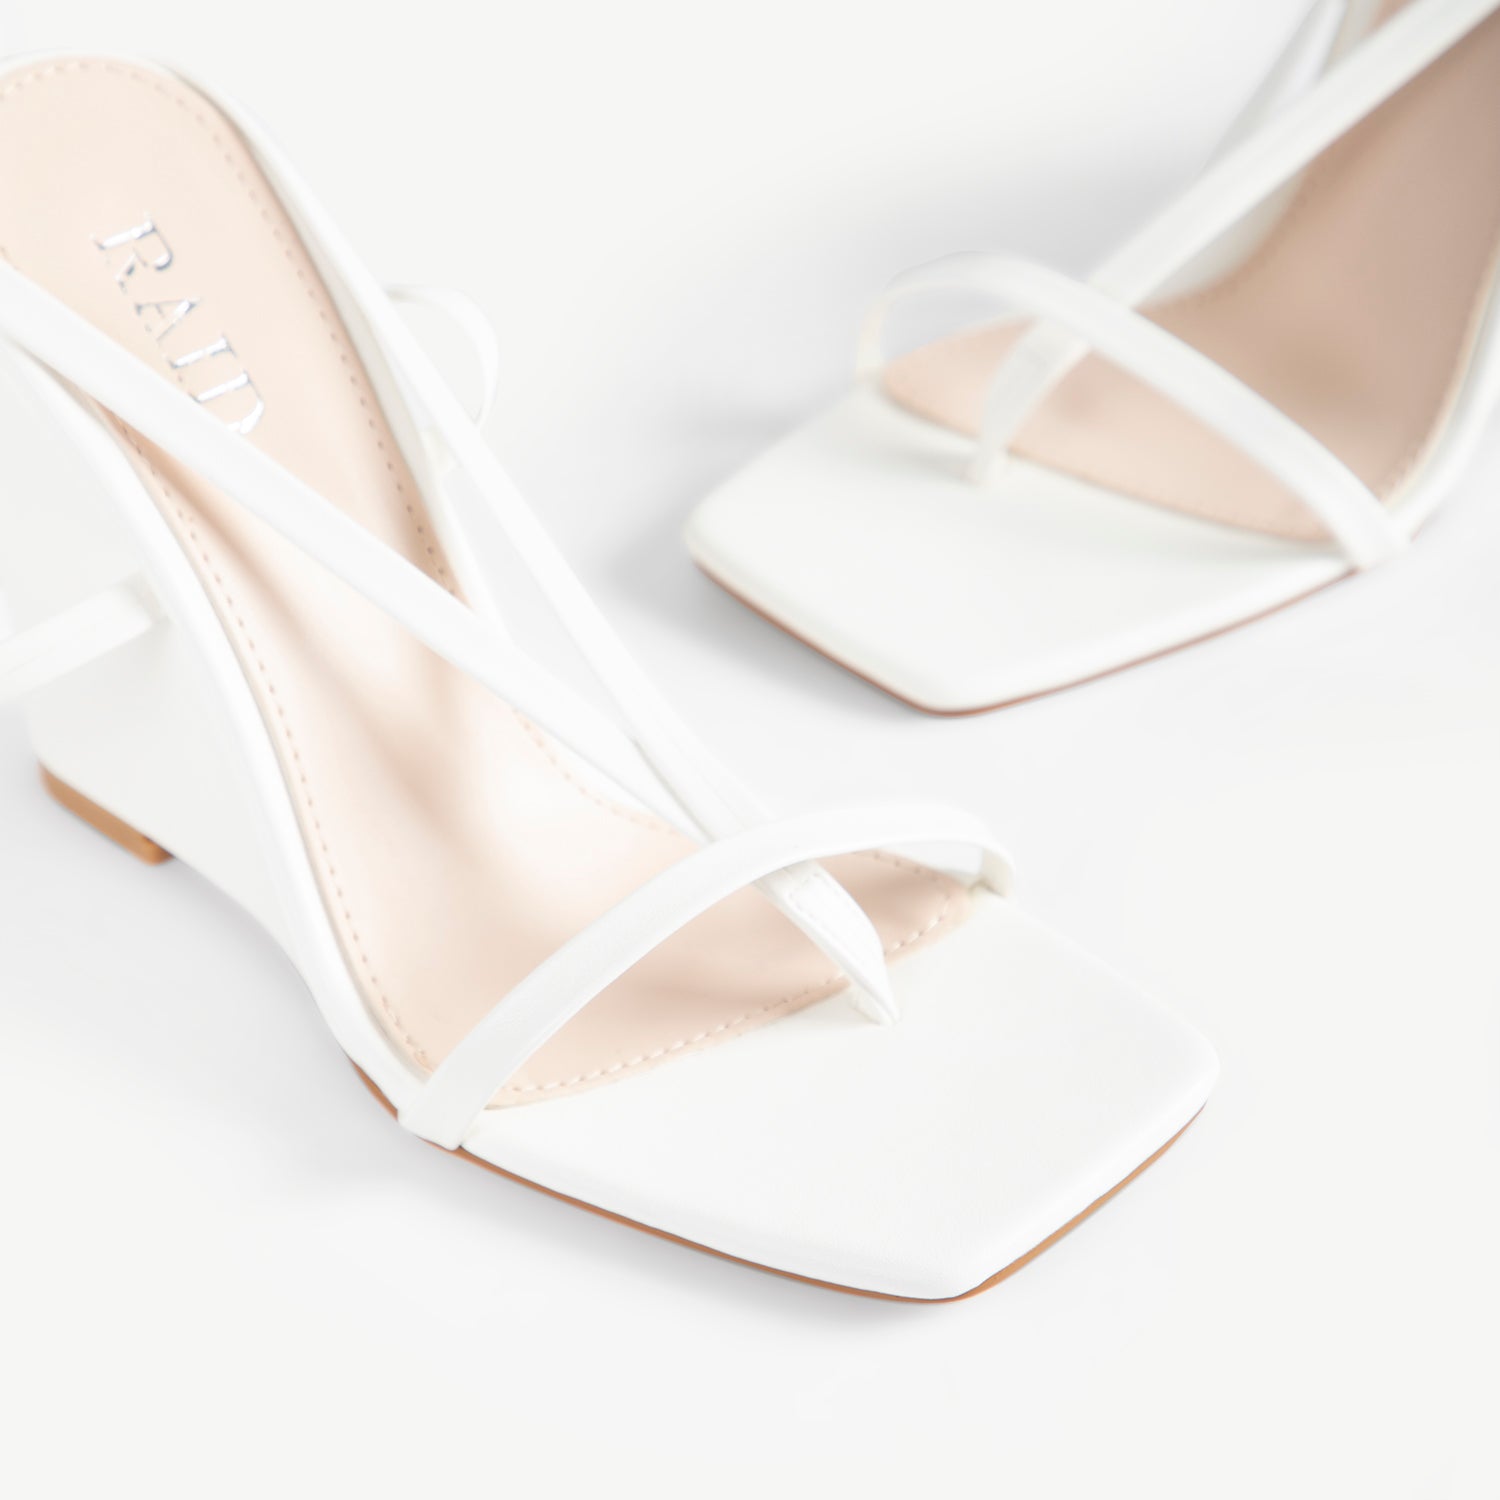 RAID Aniee Lace Up Heel in White